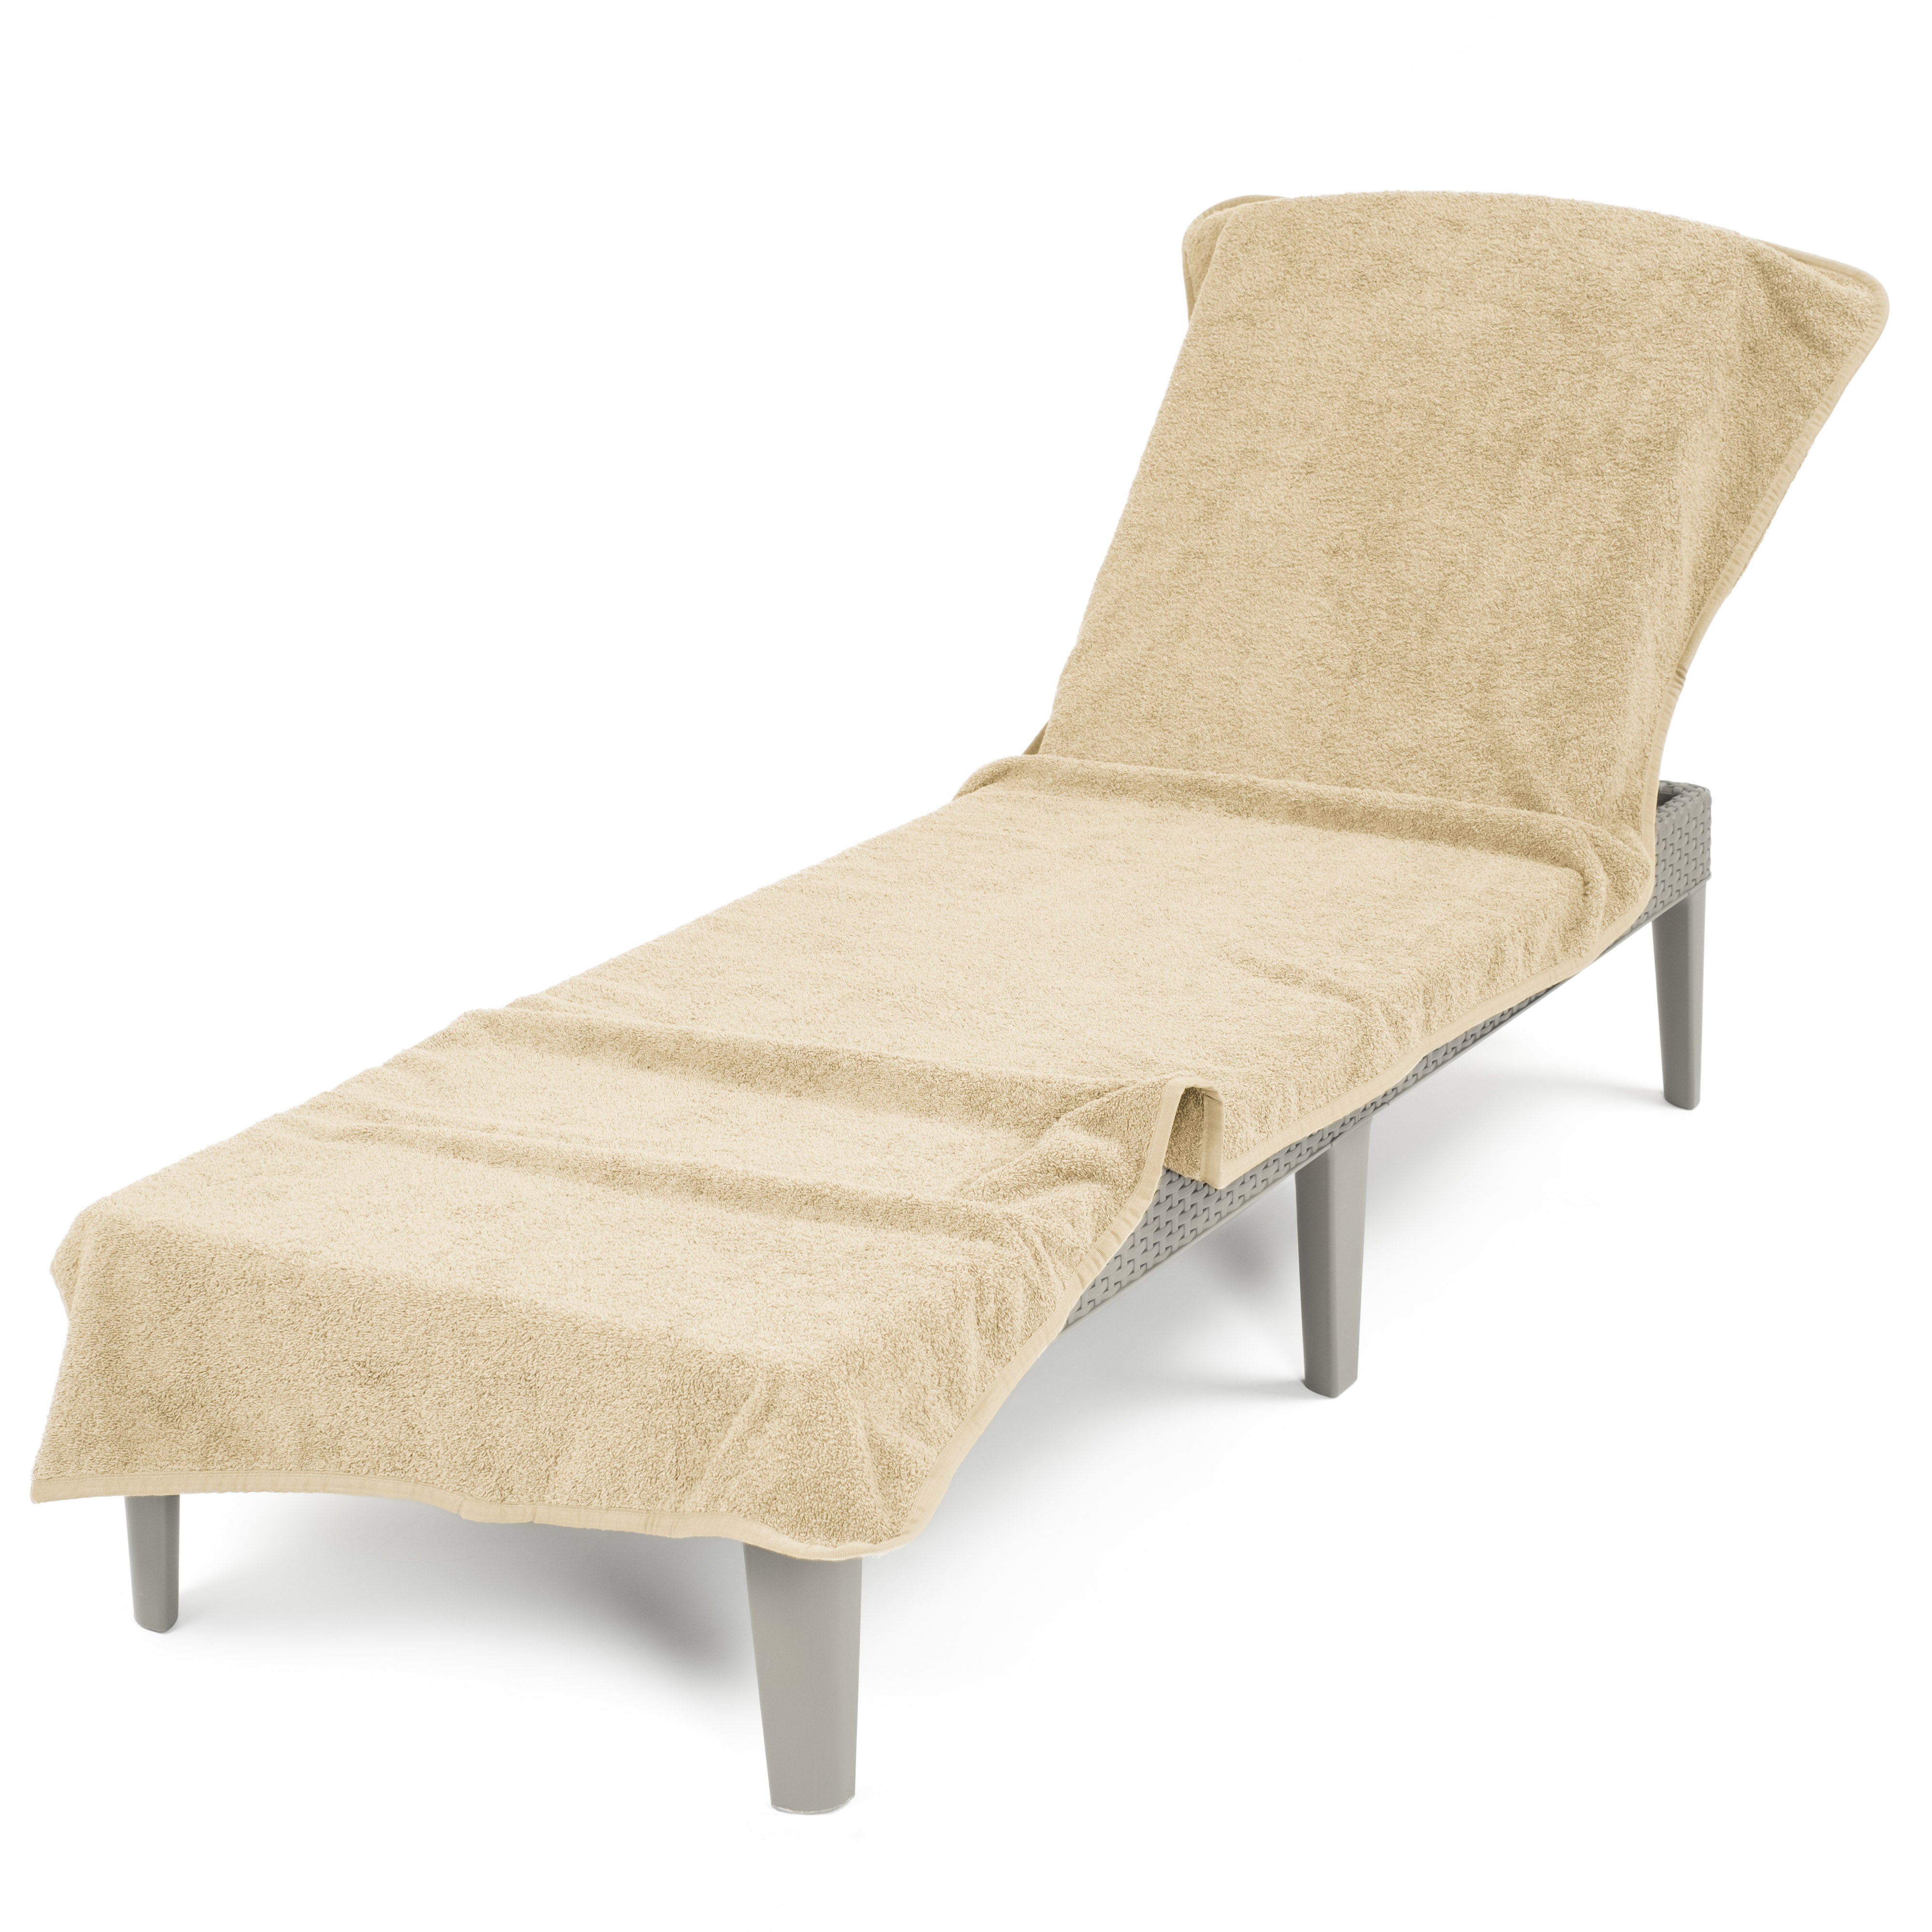 American Soft Linen - Chaise Lounge Covers Towels - Sand-Taupe -4